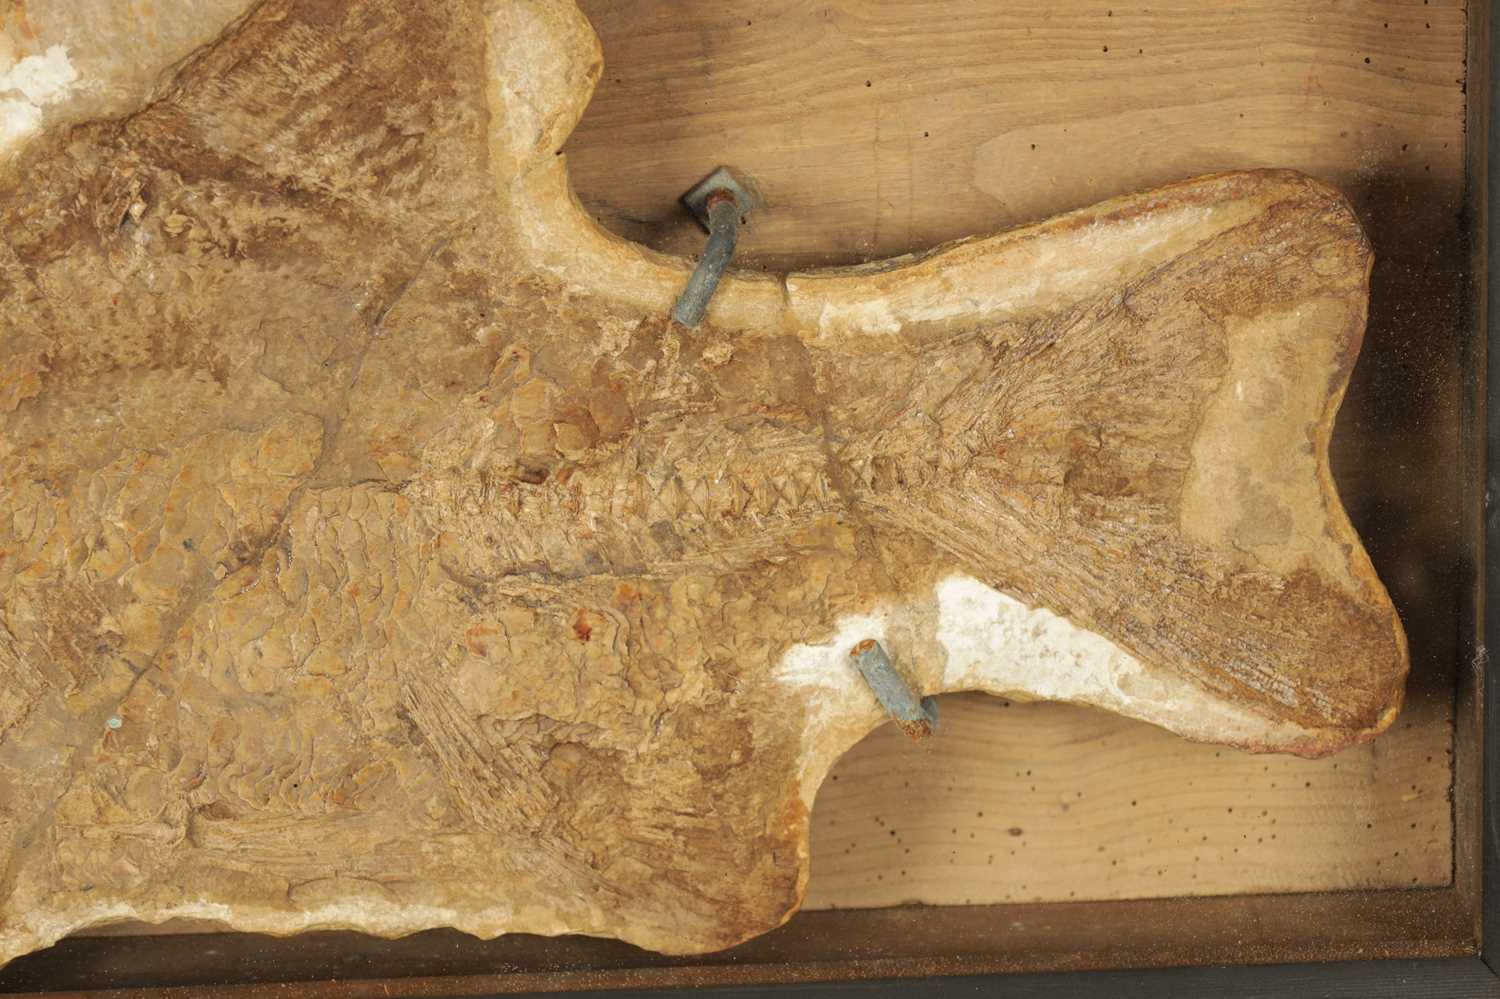 A LARGE FOSSIL OF THE EXTICT BRANNERION FISH WHICH LIVED IN THE EARLY CRETACEOUS PERIOD - Image 4 of 6